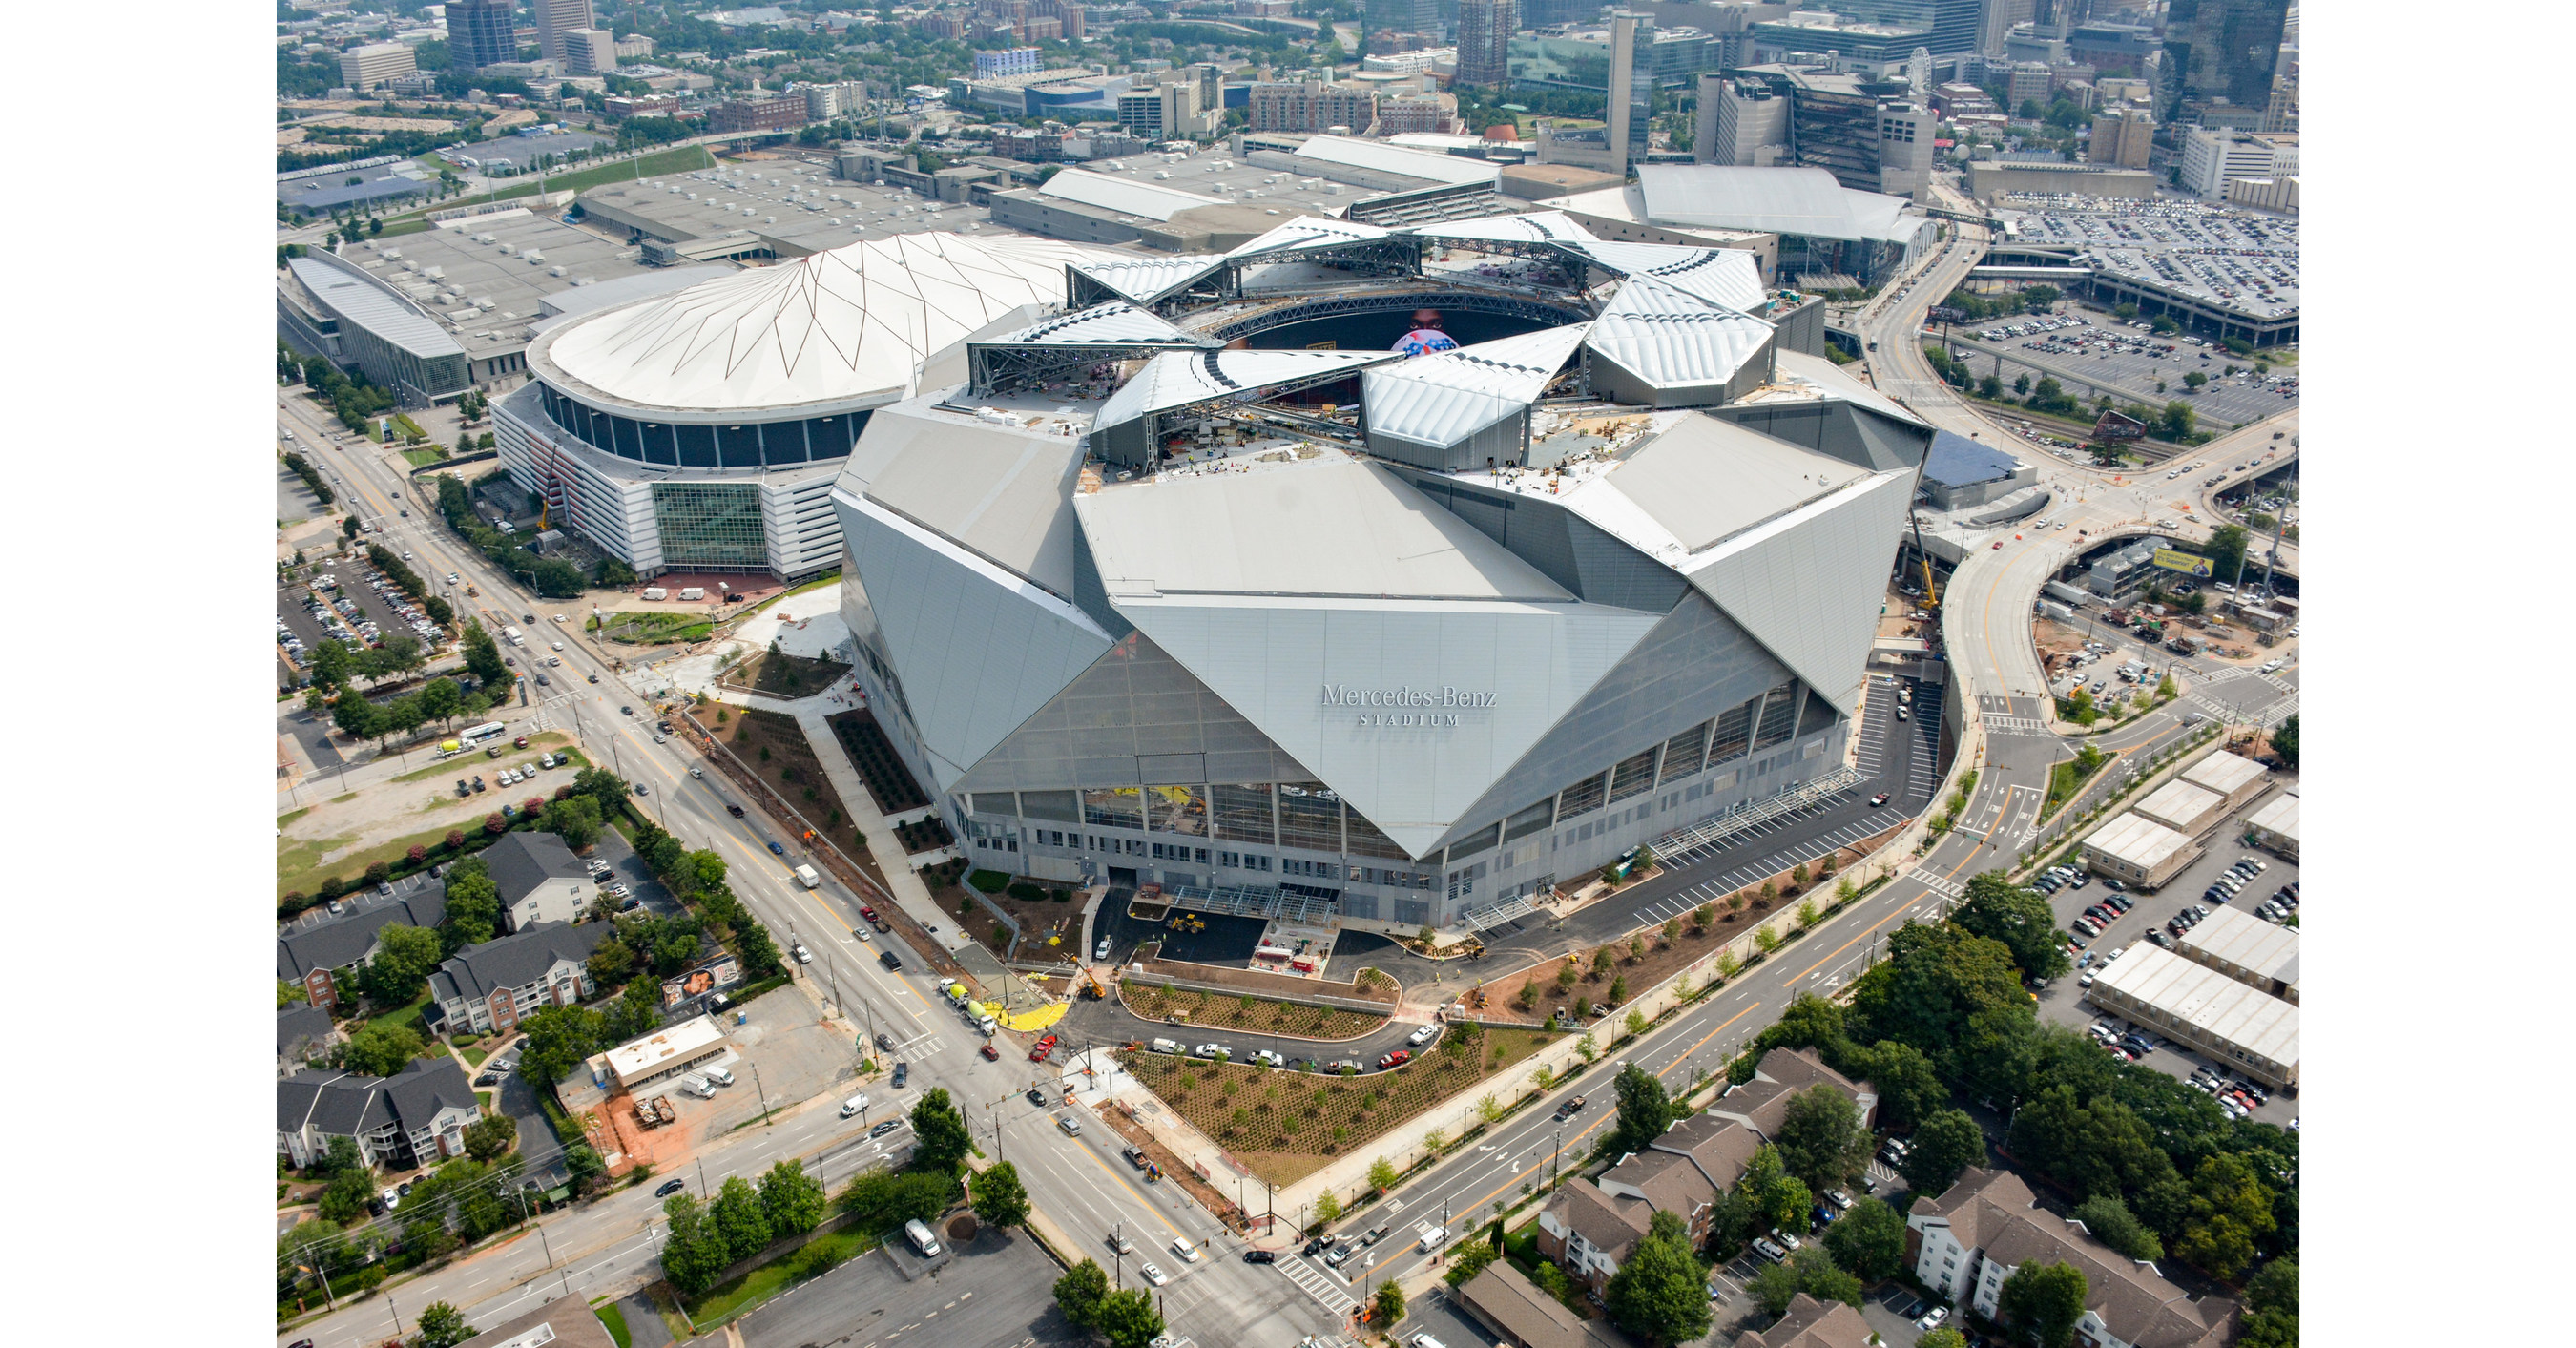 How Atlanta's Mercedes-Benz Stadium Delivers an Immersive AV Experience  Sports Fans Expect - Commercial Integrator